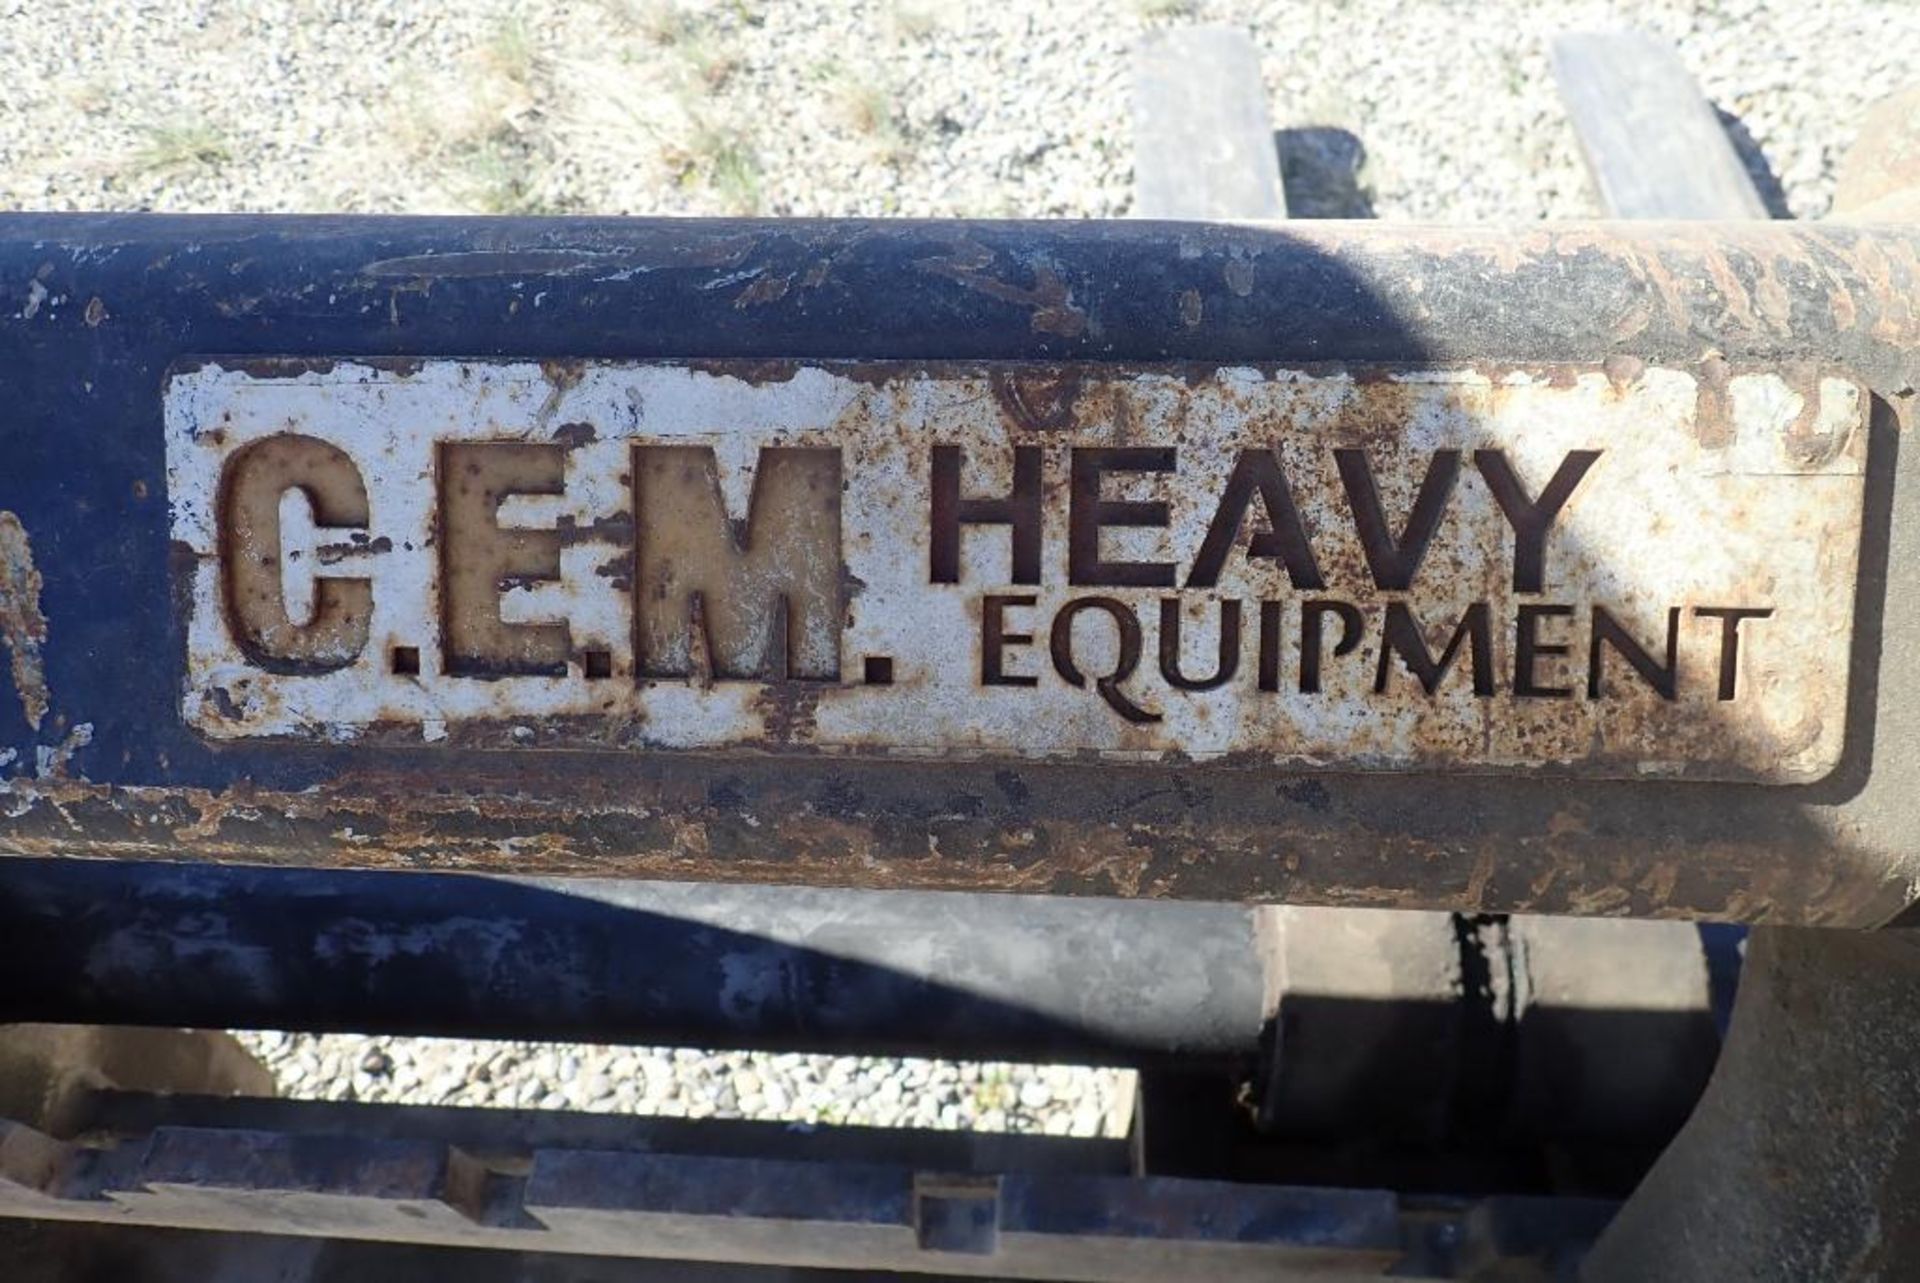 CEM Equipment QA 50" Pallet Forks Attachment for Hyundai HL740-9 Loader. NOTE: REMOVAL AUG 17TH. - Image 3 of 3